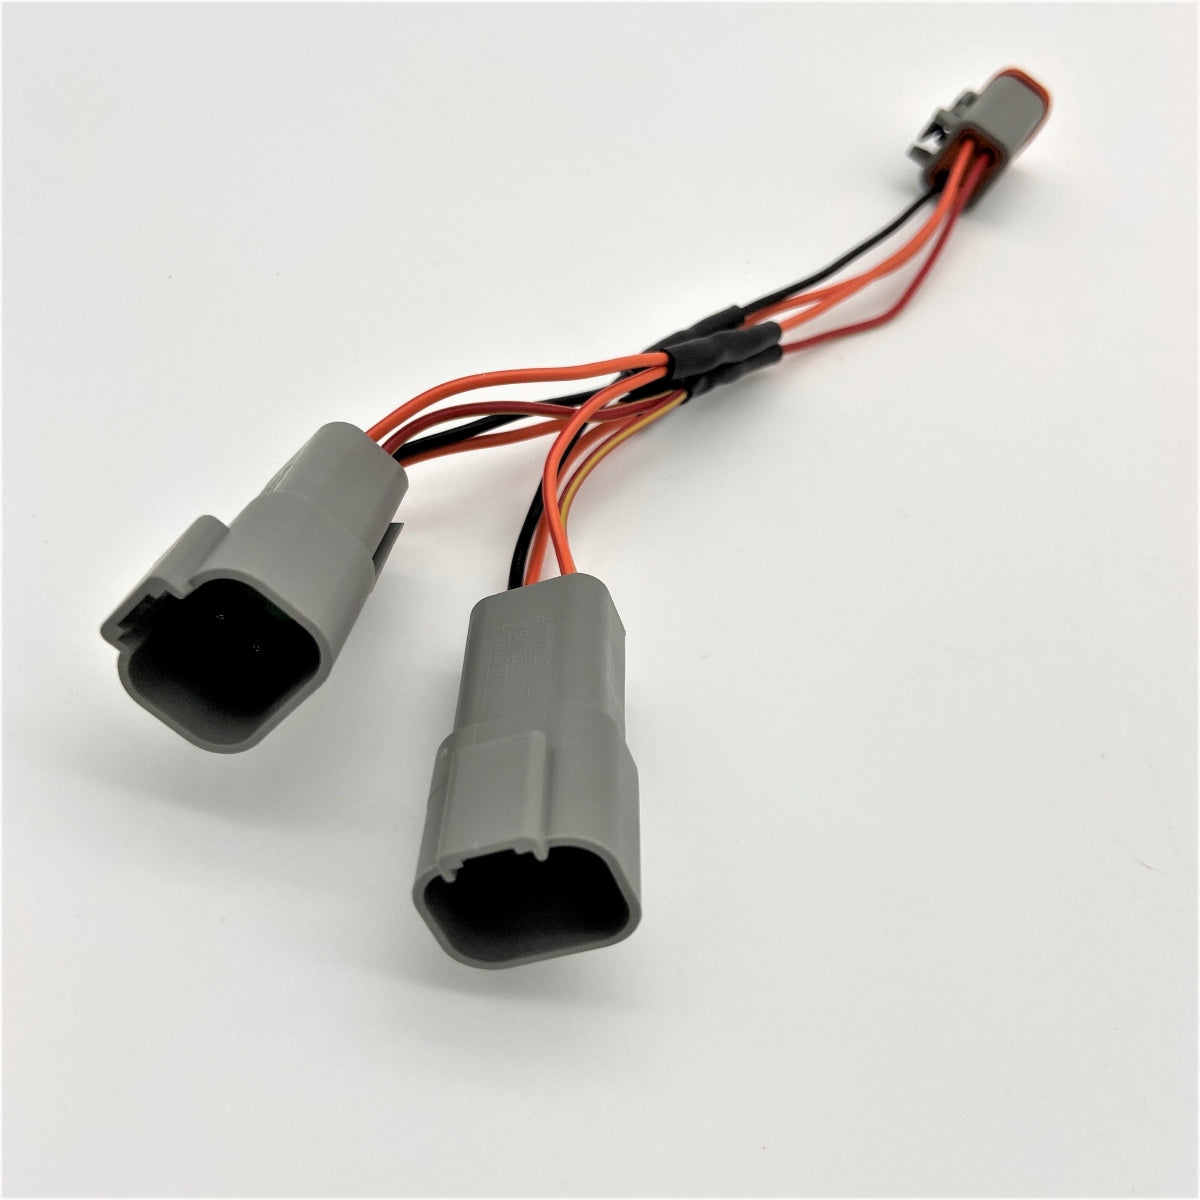 GeezerEngineering Switched Circuit Adapter (4-way Y-Adapter) for Harley